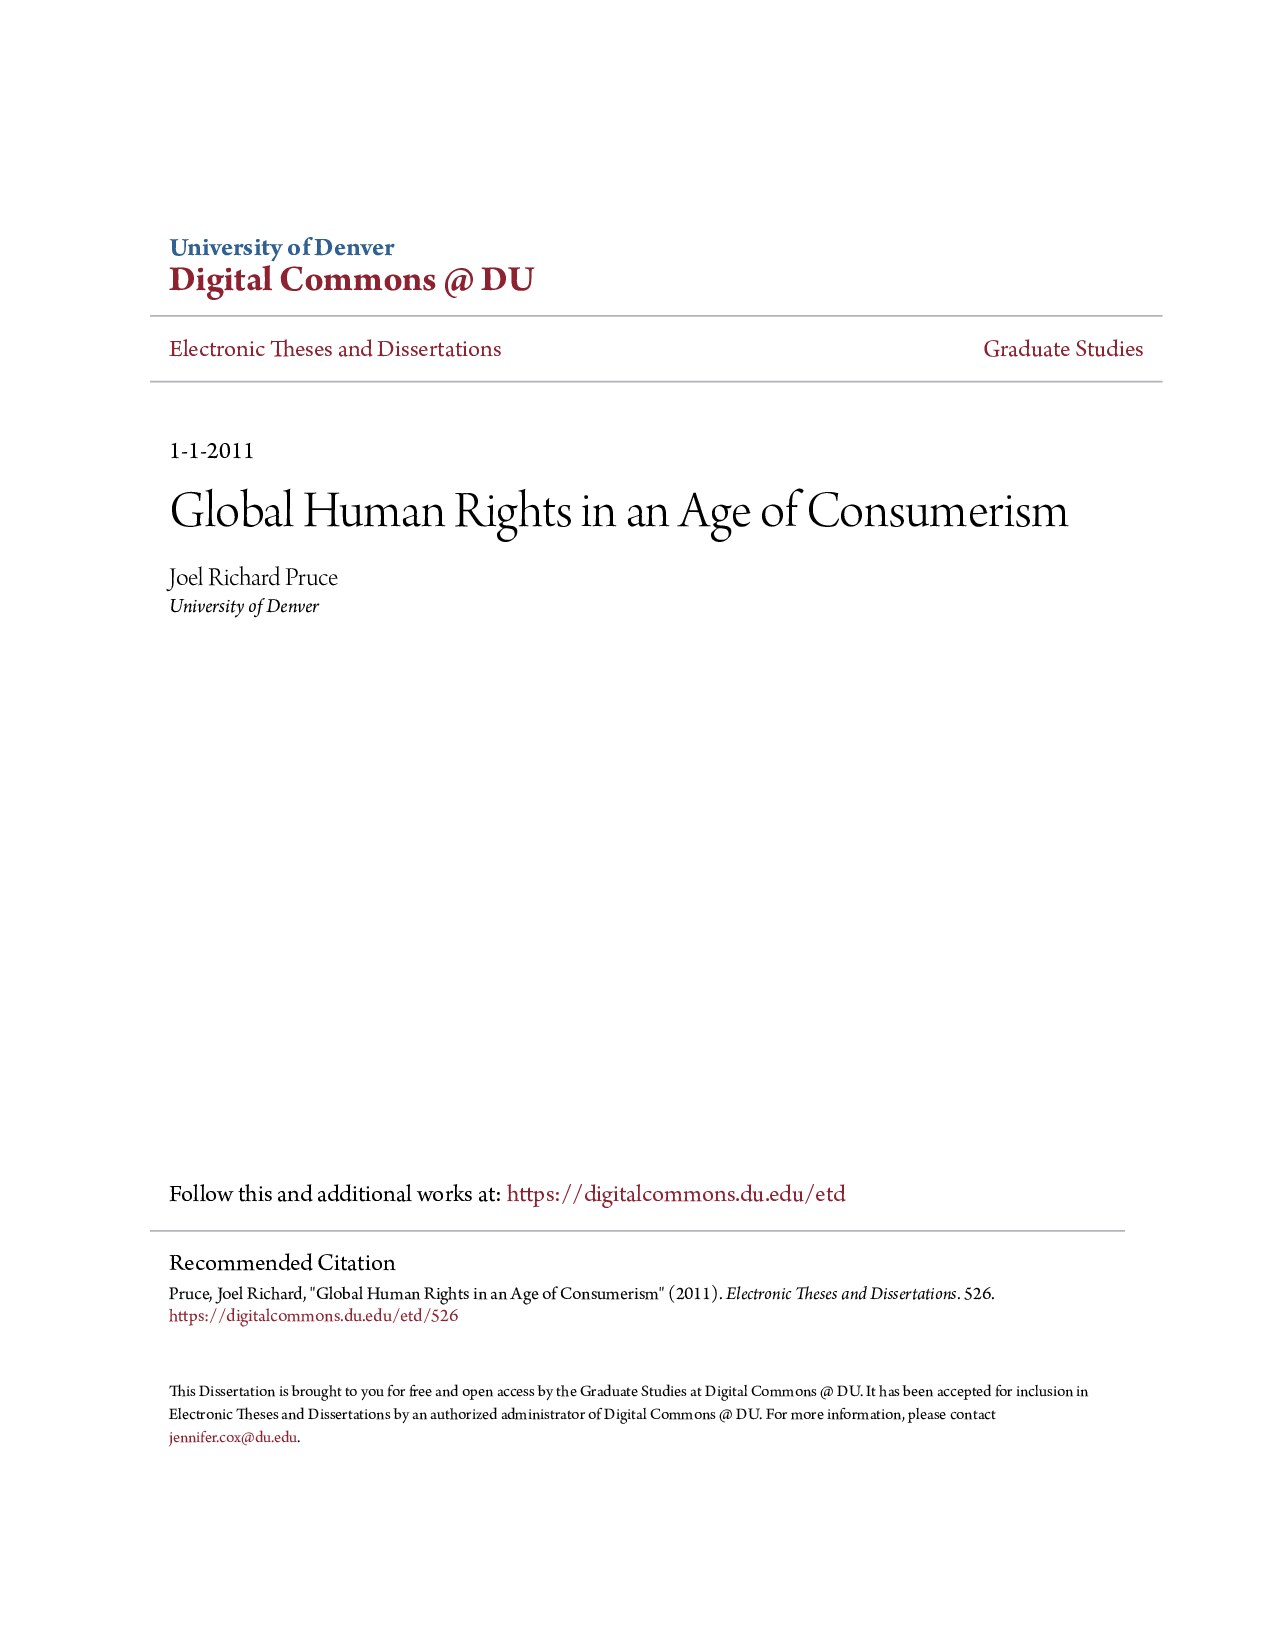 Global Human Rights in an Age of Consumerism